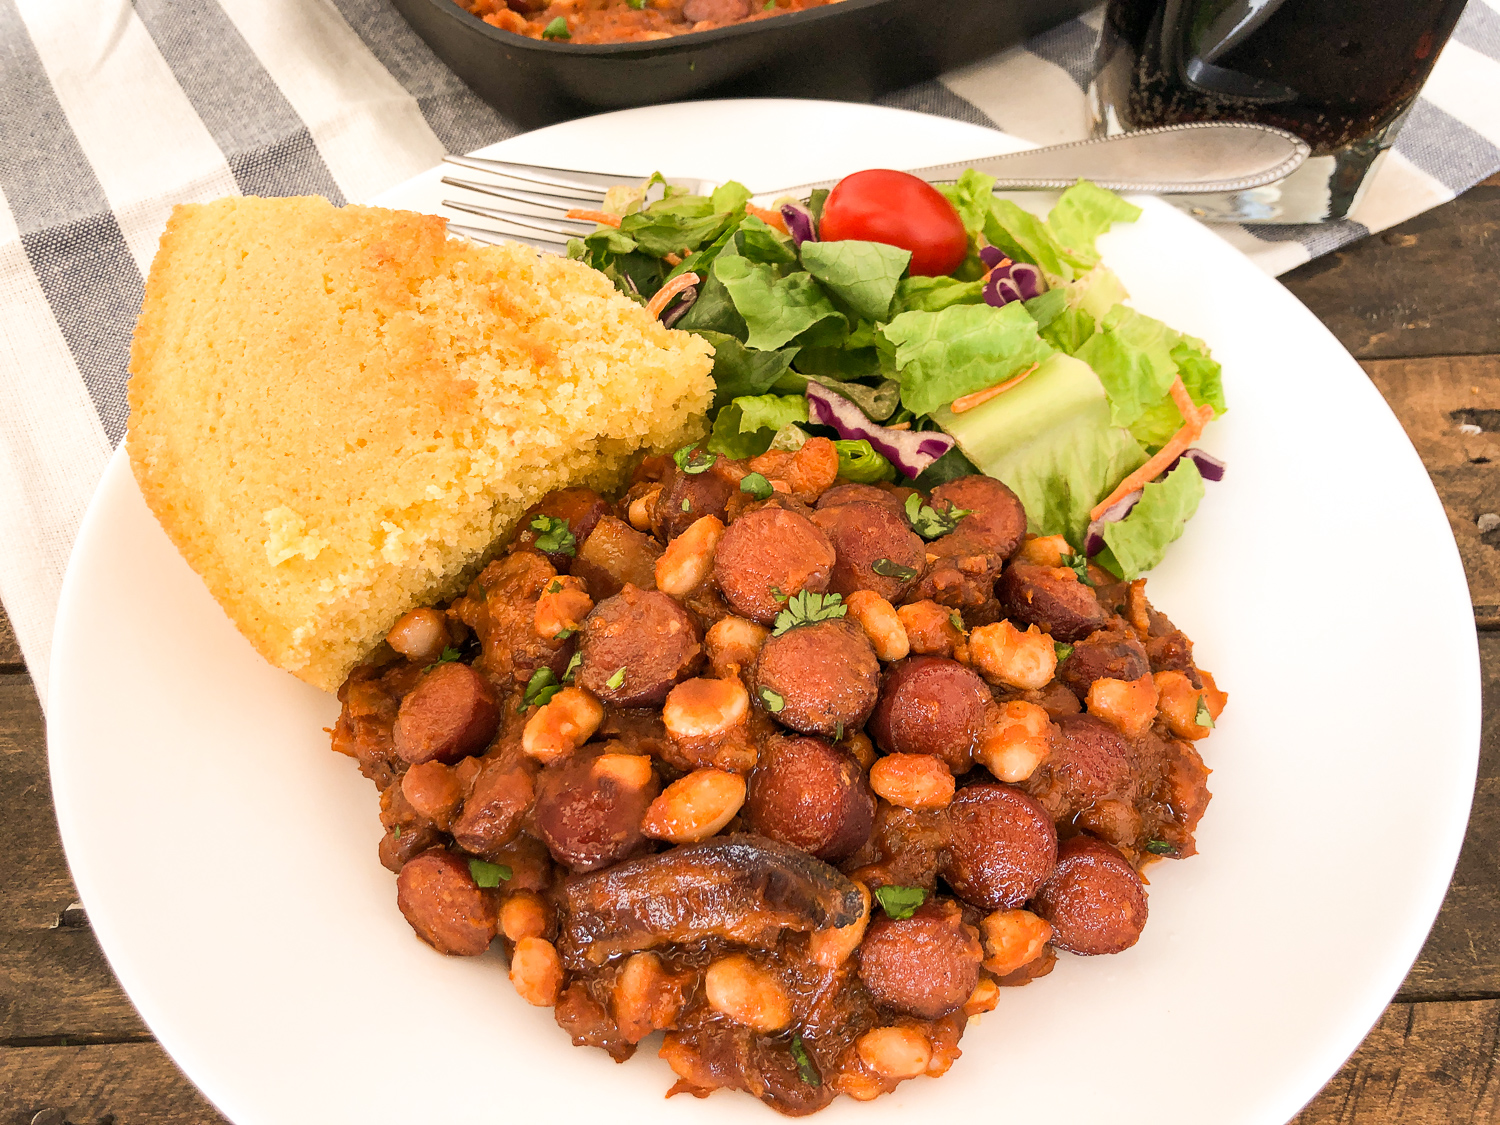 Cornbread, salad, and beans n franks on a white plate, a glass of soda and the skillet nearly out of frame.